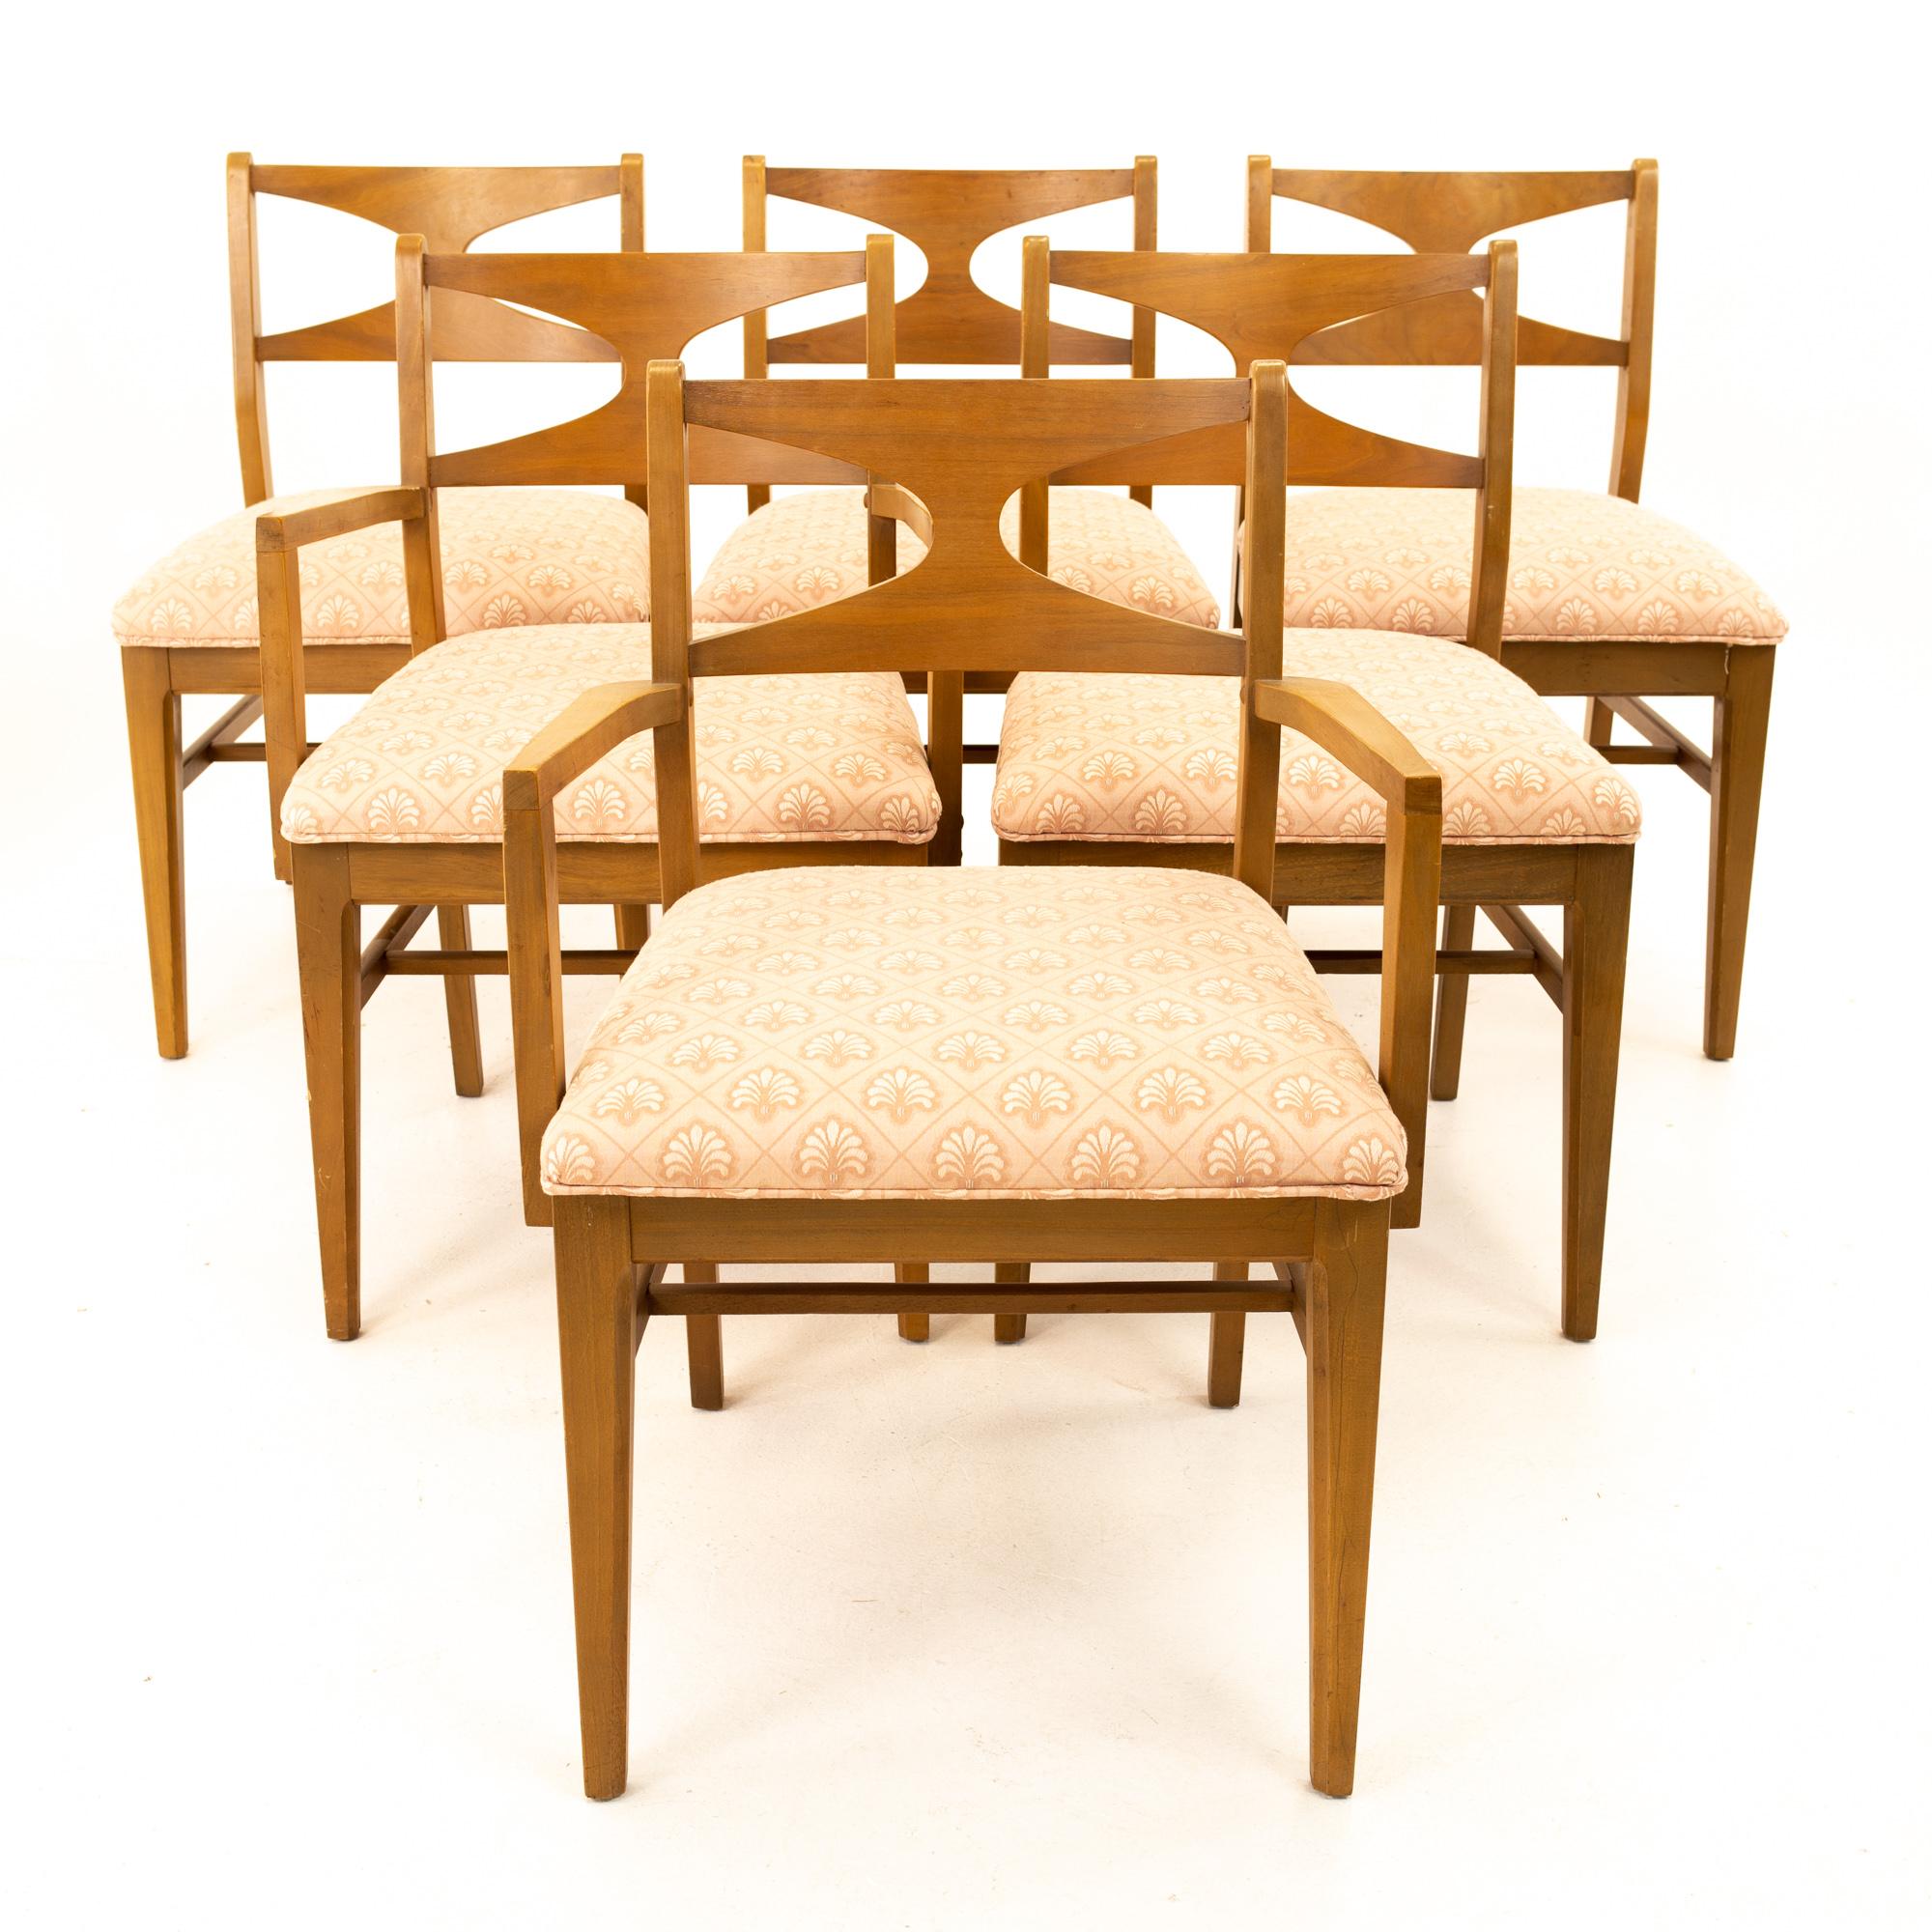 Brasilia style mid century walnut Bowtie dining chairs - Set of 6
Each chair measures: 21 wide x 21.25 deep x 31.5 high, with a seat height of 19.75 inches

All pieces of furniture can be had in what we call restored vintage condition. That means